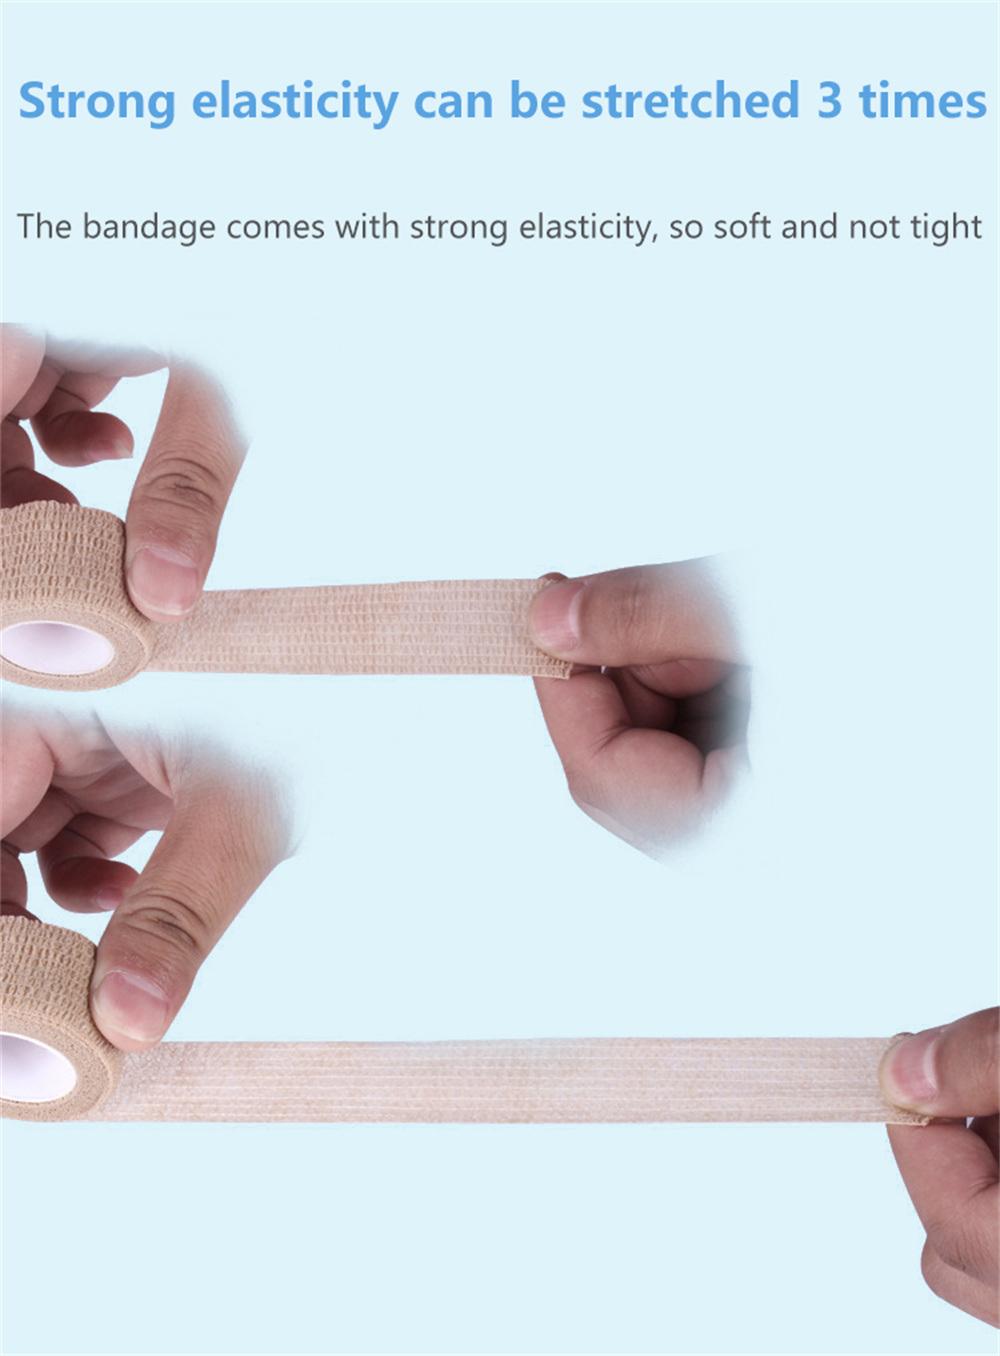 Self Adherent Cohesive Bandage Uses Include Vet Wrap Tape for Human Wrist and Ankle Sprains and Sports Injuries